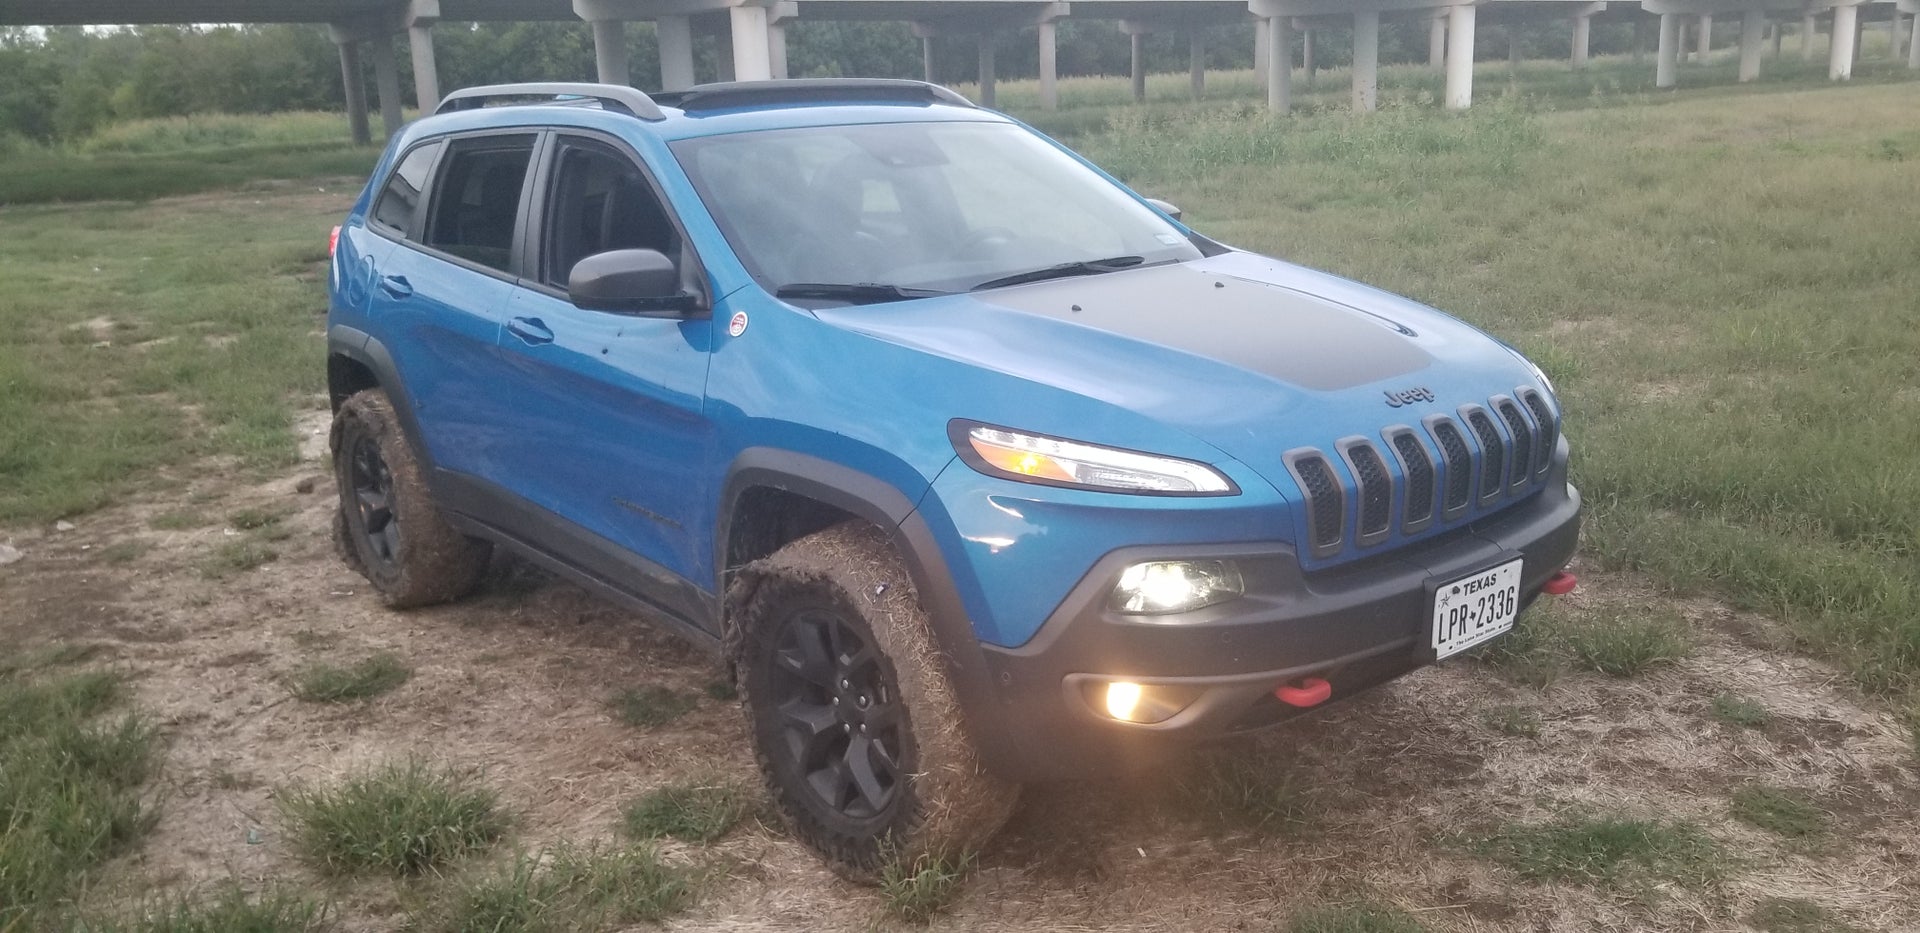 3 4 Wheel Ers For 2018 Trailhawk